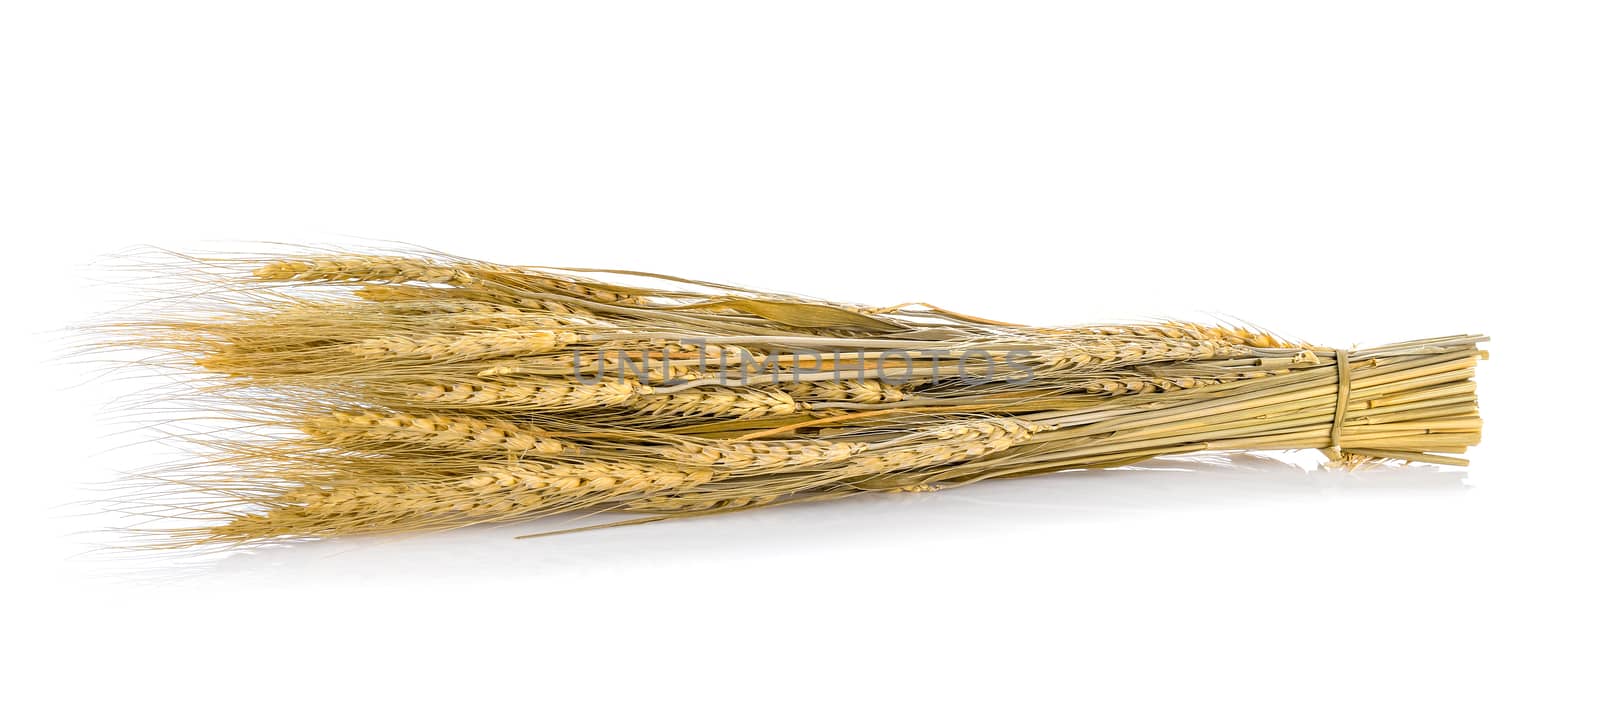 Ear of barley on white background by sommai